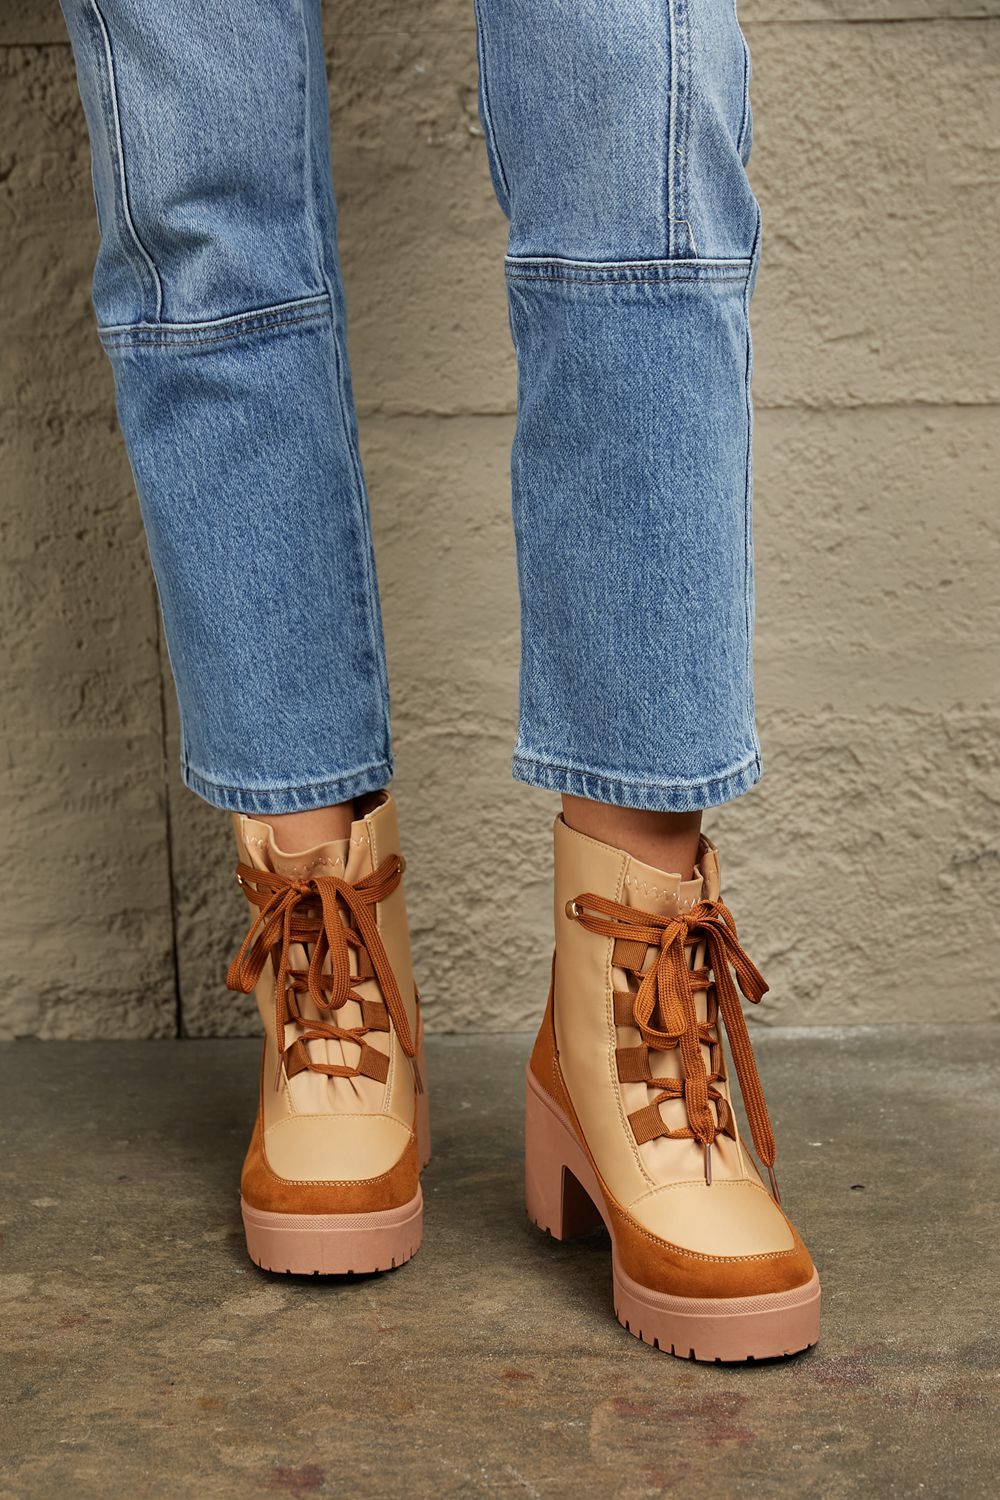 East Lion Corp Lace Up Lug Booties Print on any thing USA/STOD clothes